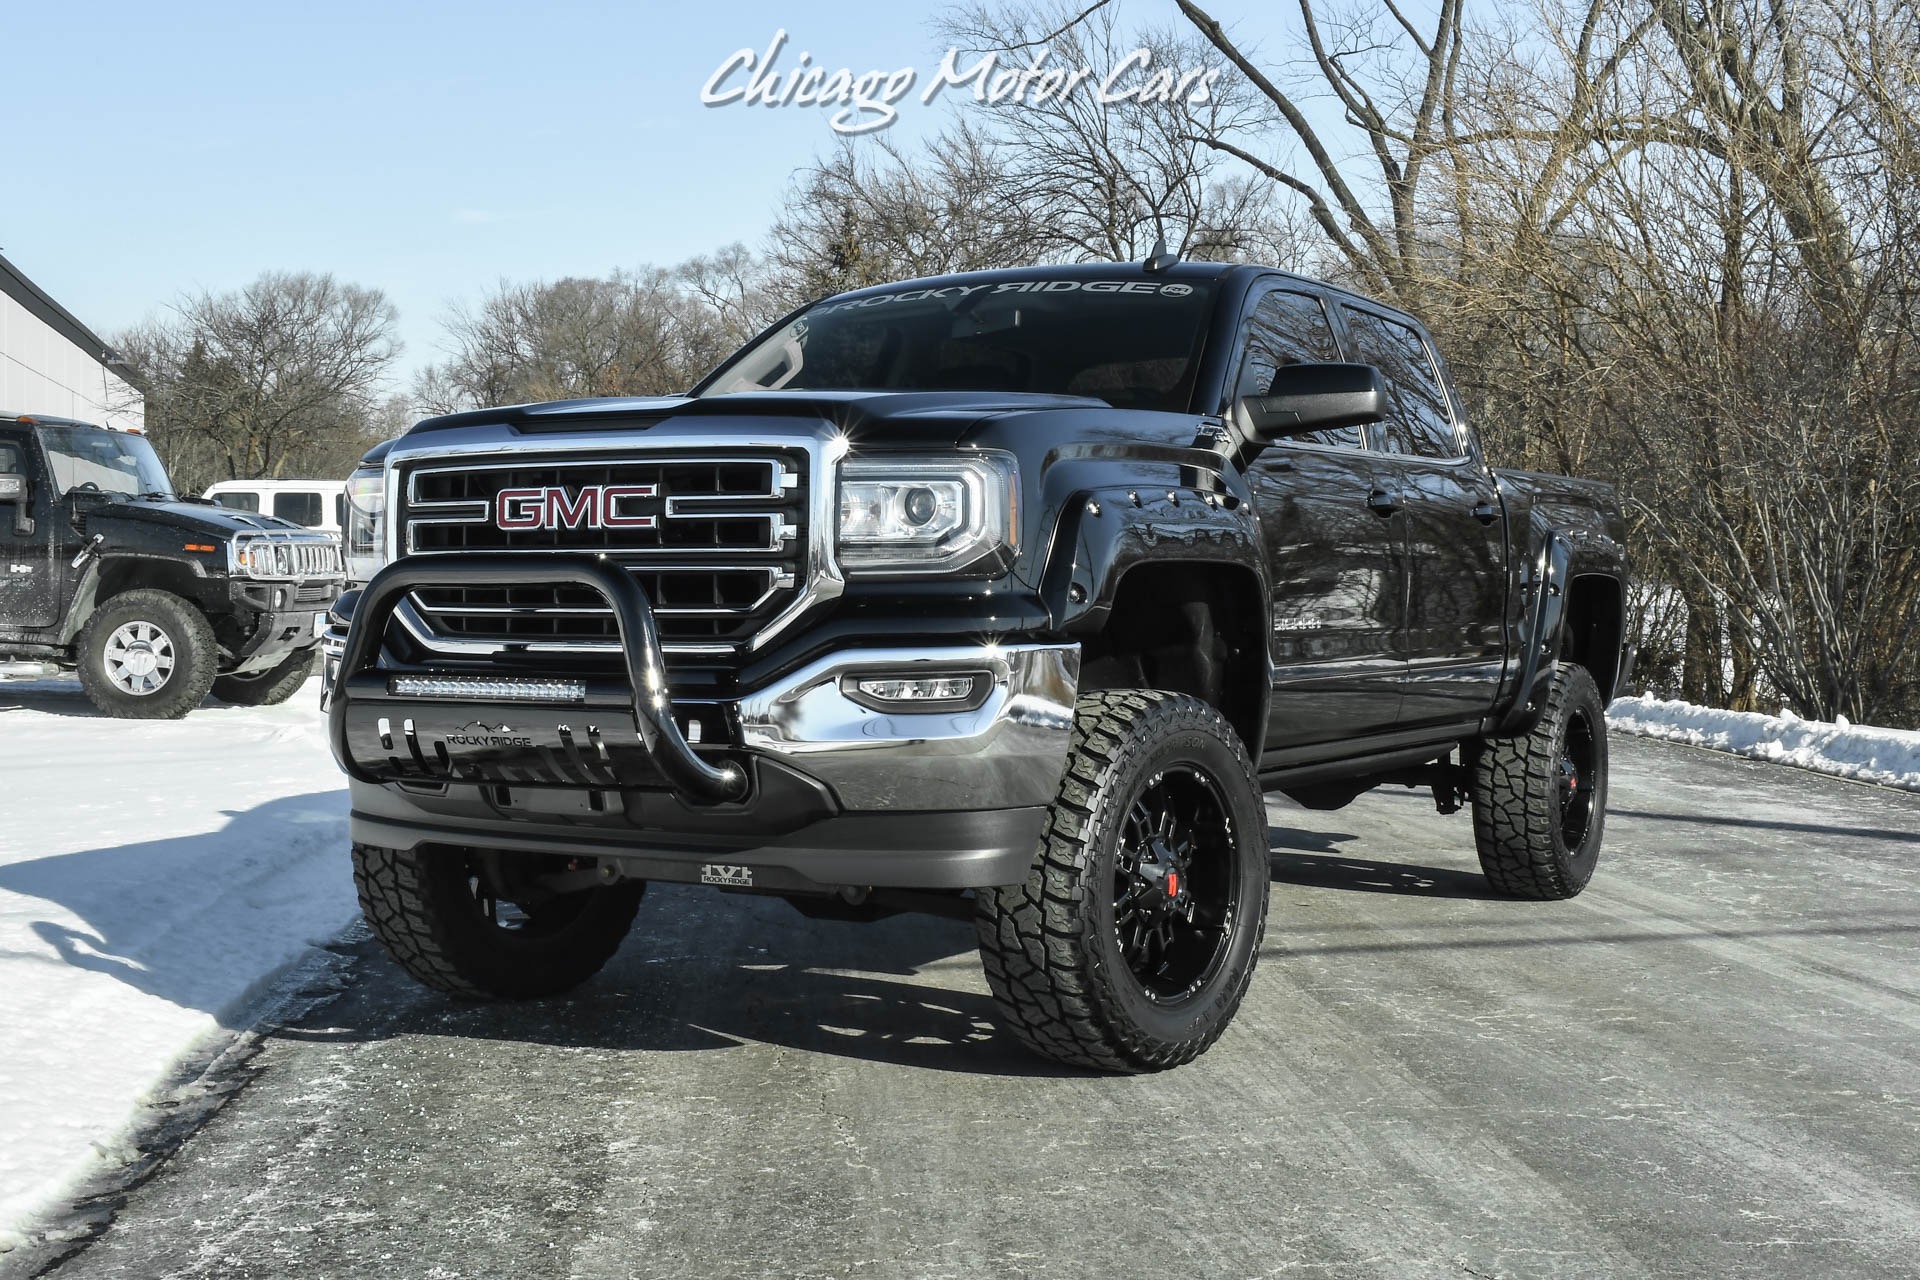 Used 2016 GMC Sierra 1500 SLE 4WD Crew Cab Pickup Rocky Ridge! $17k+ in  UPGRADES! Highly Equipped! For Sale (Special Pricing) | Chicago Motor Cars  Stock #18931B